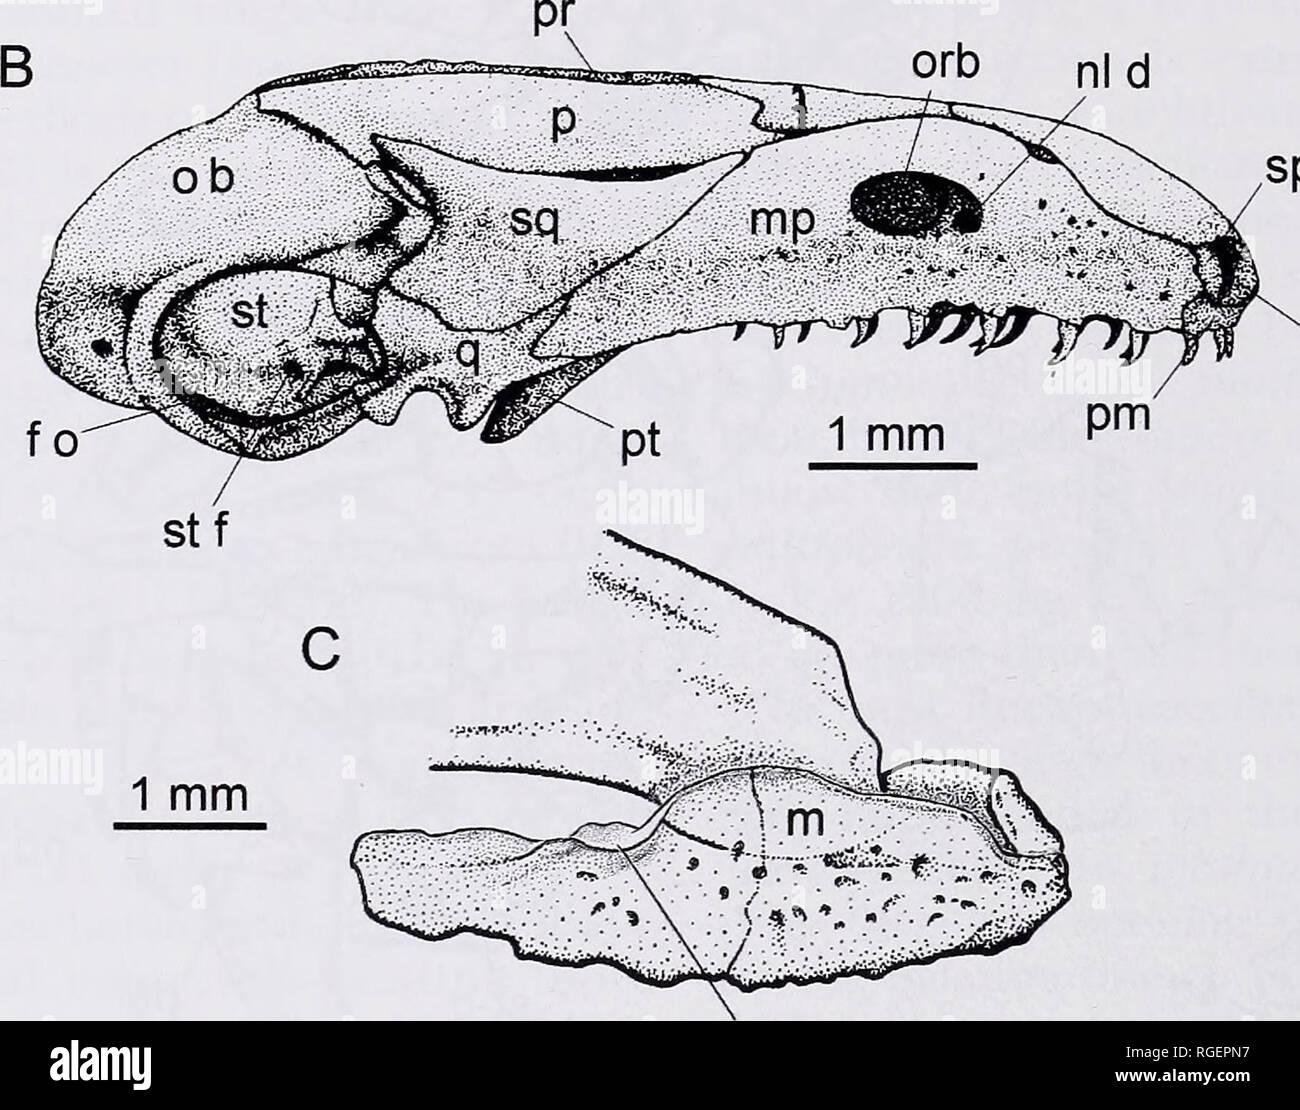 . Bulletin of the Museum of Comparative Zoology at Harvard College. Zoology; Zoology. orb nl d. spm ex n ten s Figure 10. (A) A skull and lower jaw of Ichthyophis glutinosus (skull drawn from Taylor, 1969, fig. 2; lower jaw drawn from Sarasin and Sarasin, 1887-1890, pi. 15, fig. 3). (B) Lateral view of the skull of Epicrionops petersi (reproduced from Nussbaum, 1977, fig. 1). (C) A right maxilla of Eocaecilia micropodia (MCZ 9156) exhibiting a tentacular sulcus (ten s). mon to representatives of all extant fami- lies: rhinatrematids (Epicrionops, Nuss- baum, 1977, fig. 1), ichthyophiids (Ichth Stock Photo